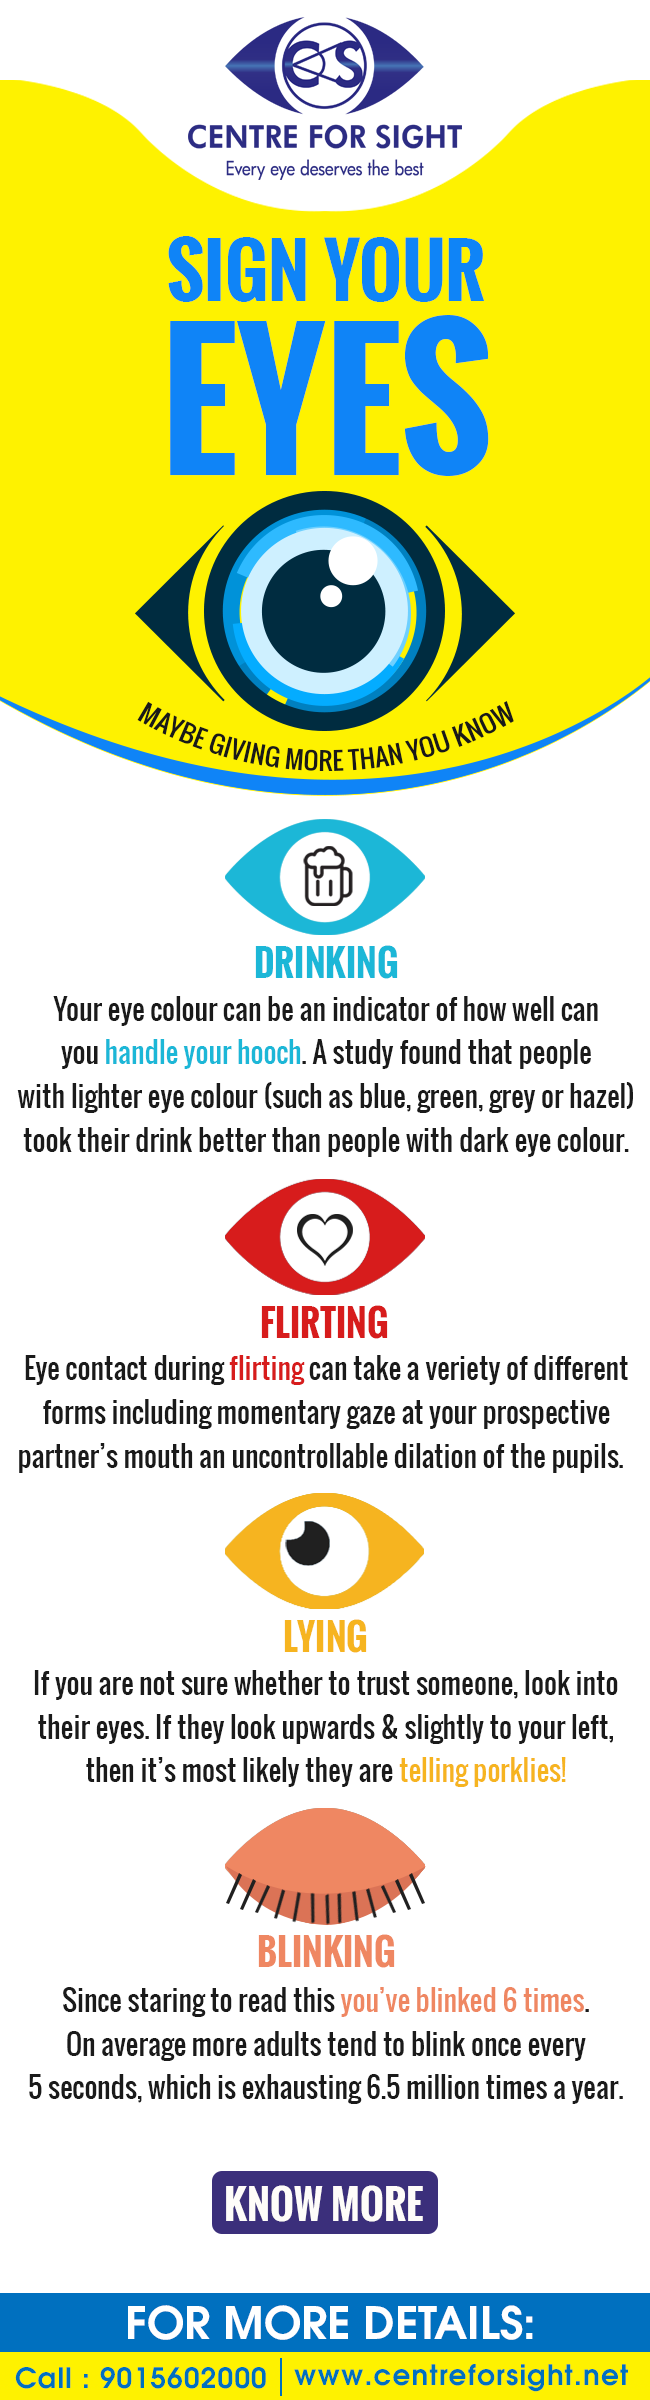 eye-signs.png  by centreforsight